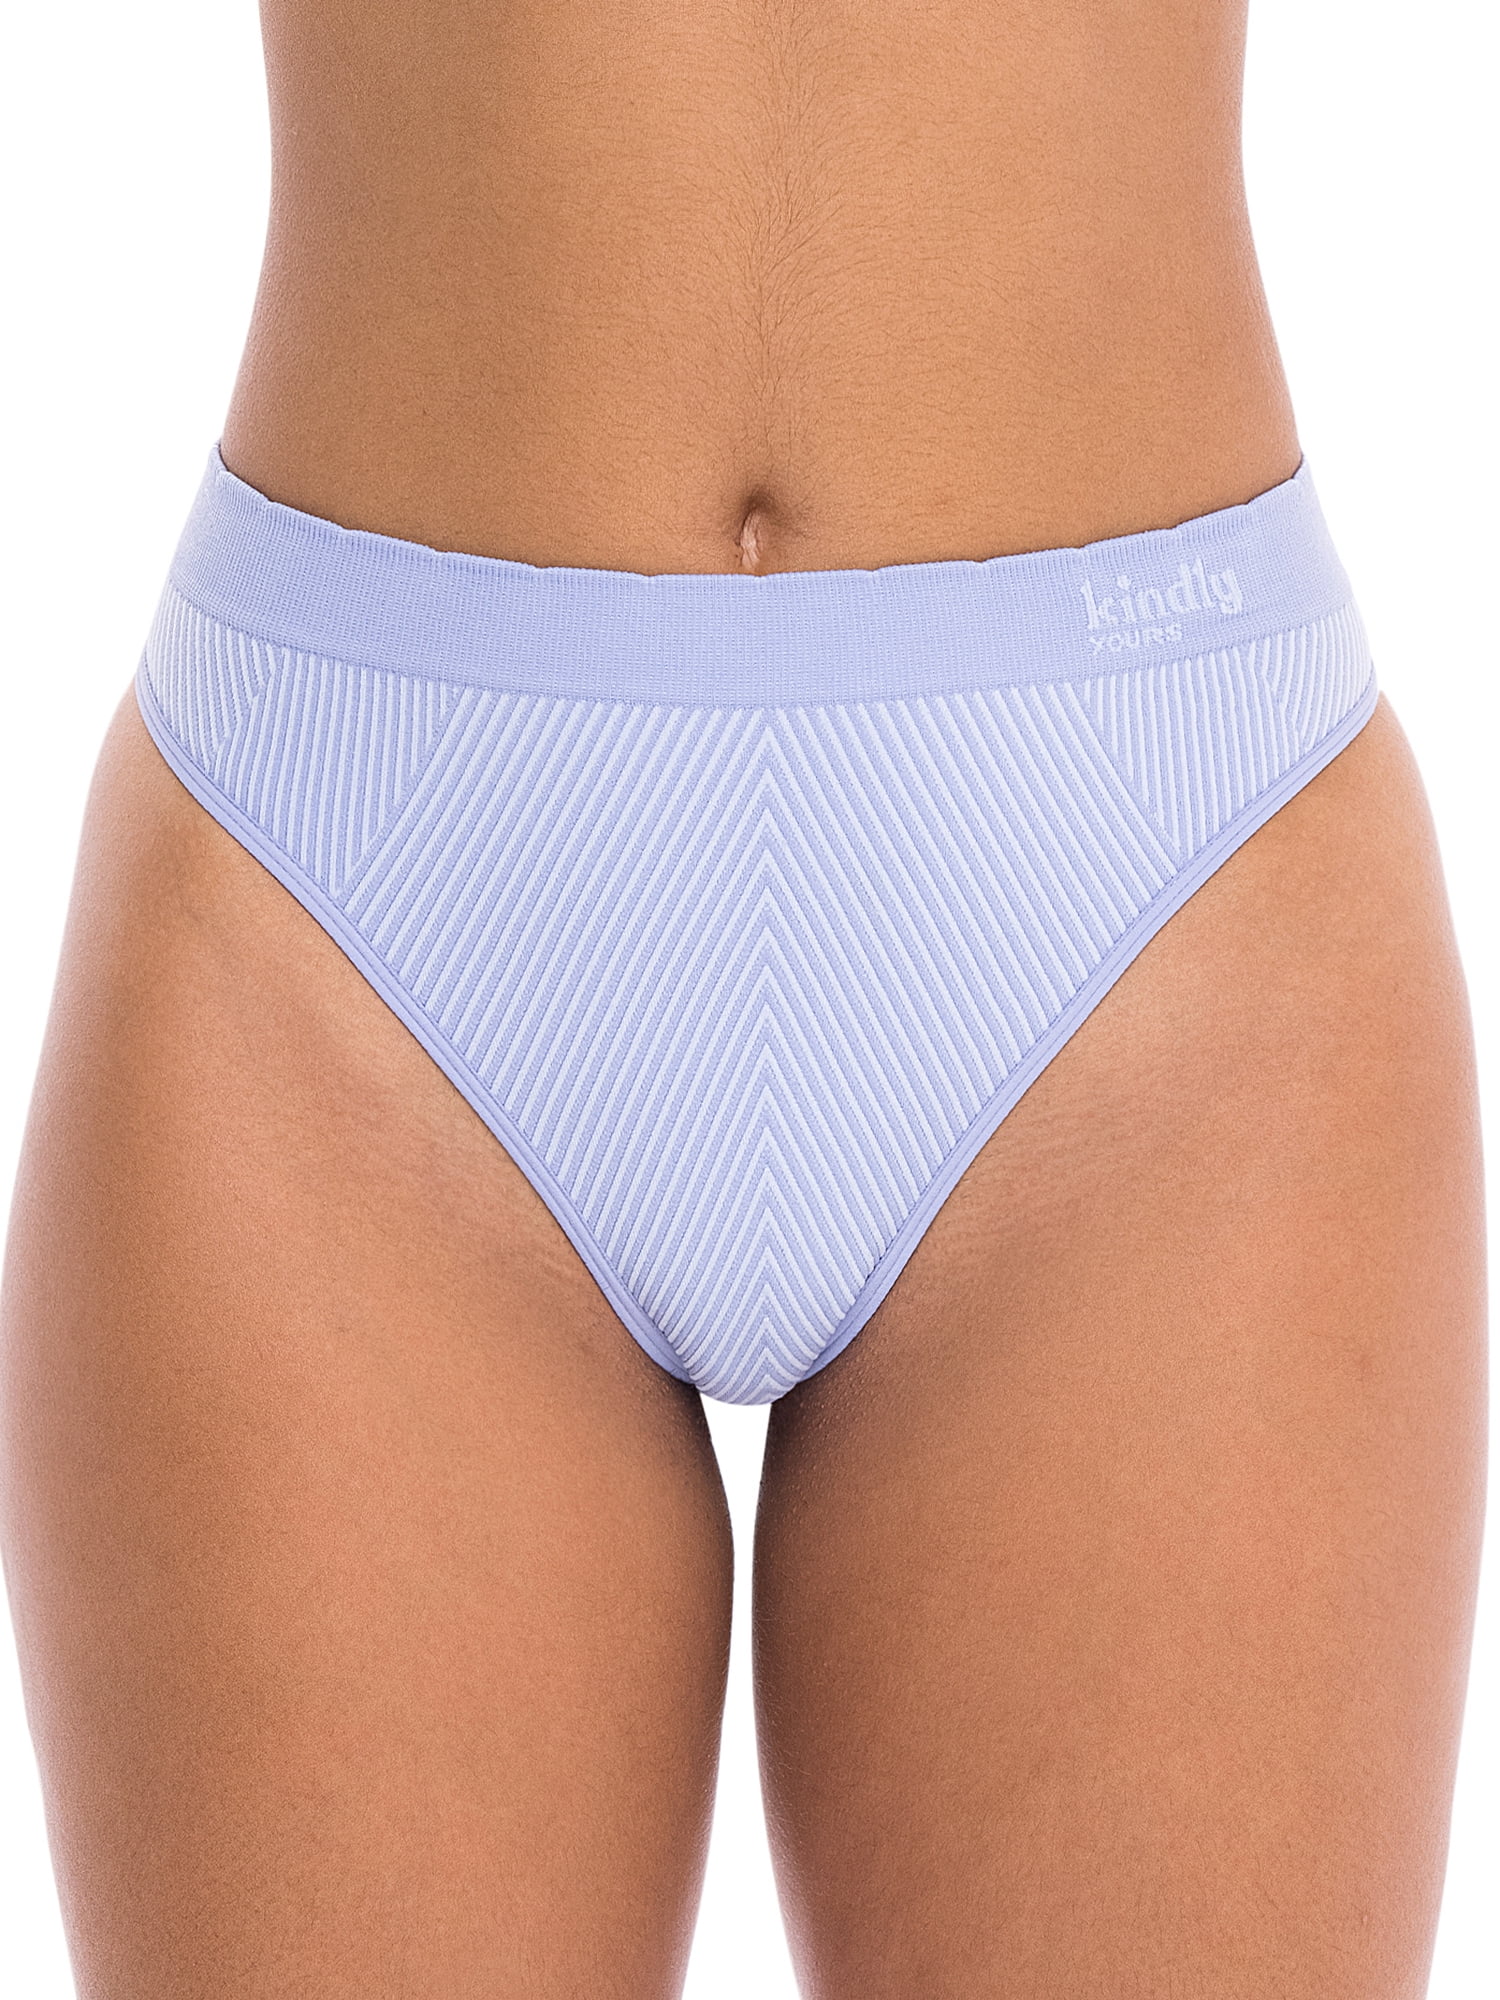 Kindly Yours Women's Sustainable Cotton Thong Underwear, 3-Pack, Sizes XS  to XXXL 